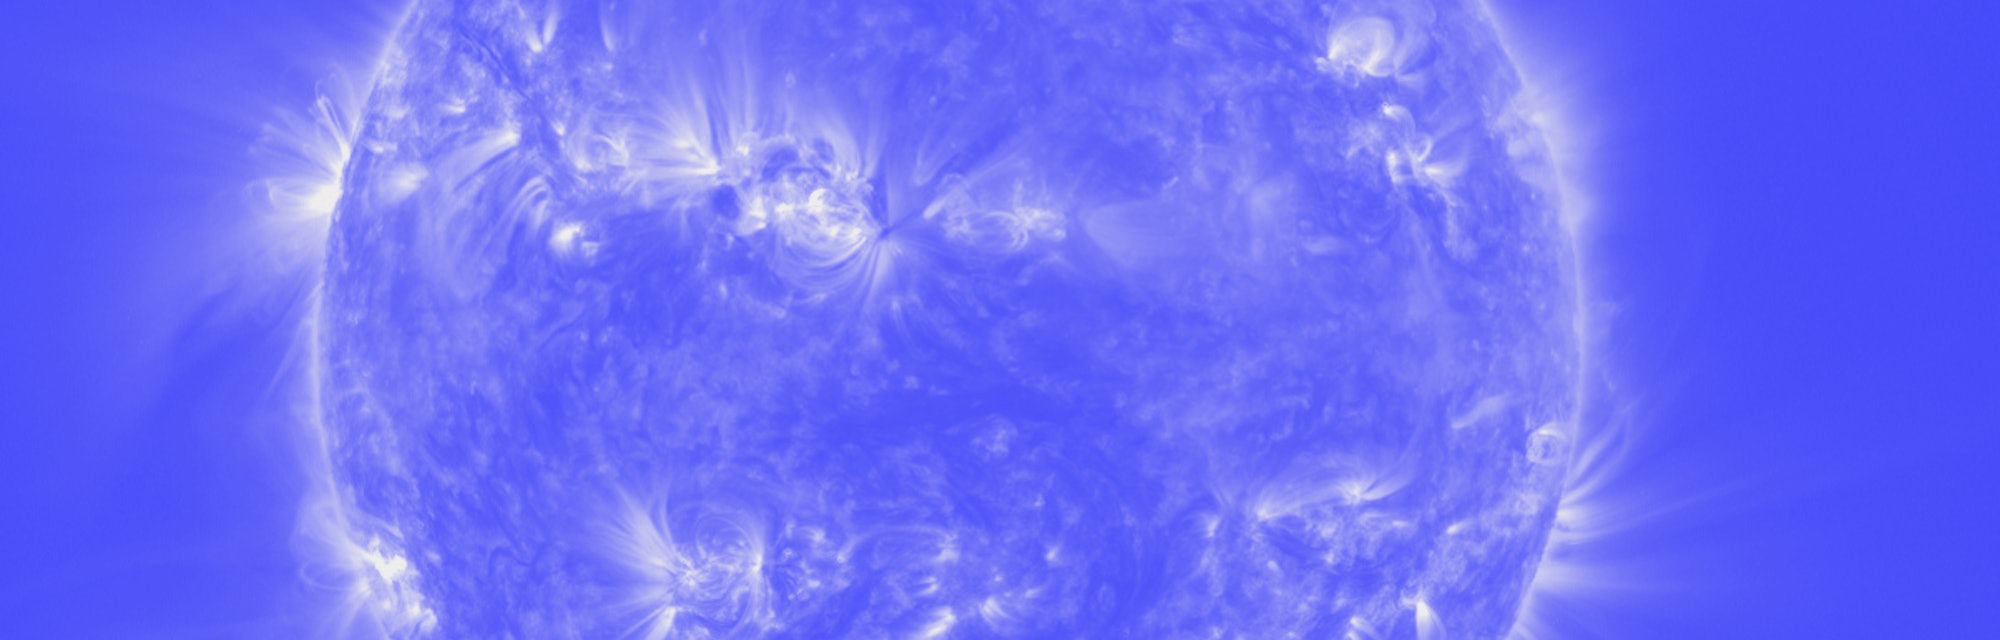 GOES sun image cut out